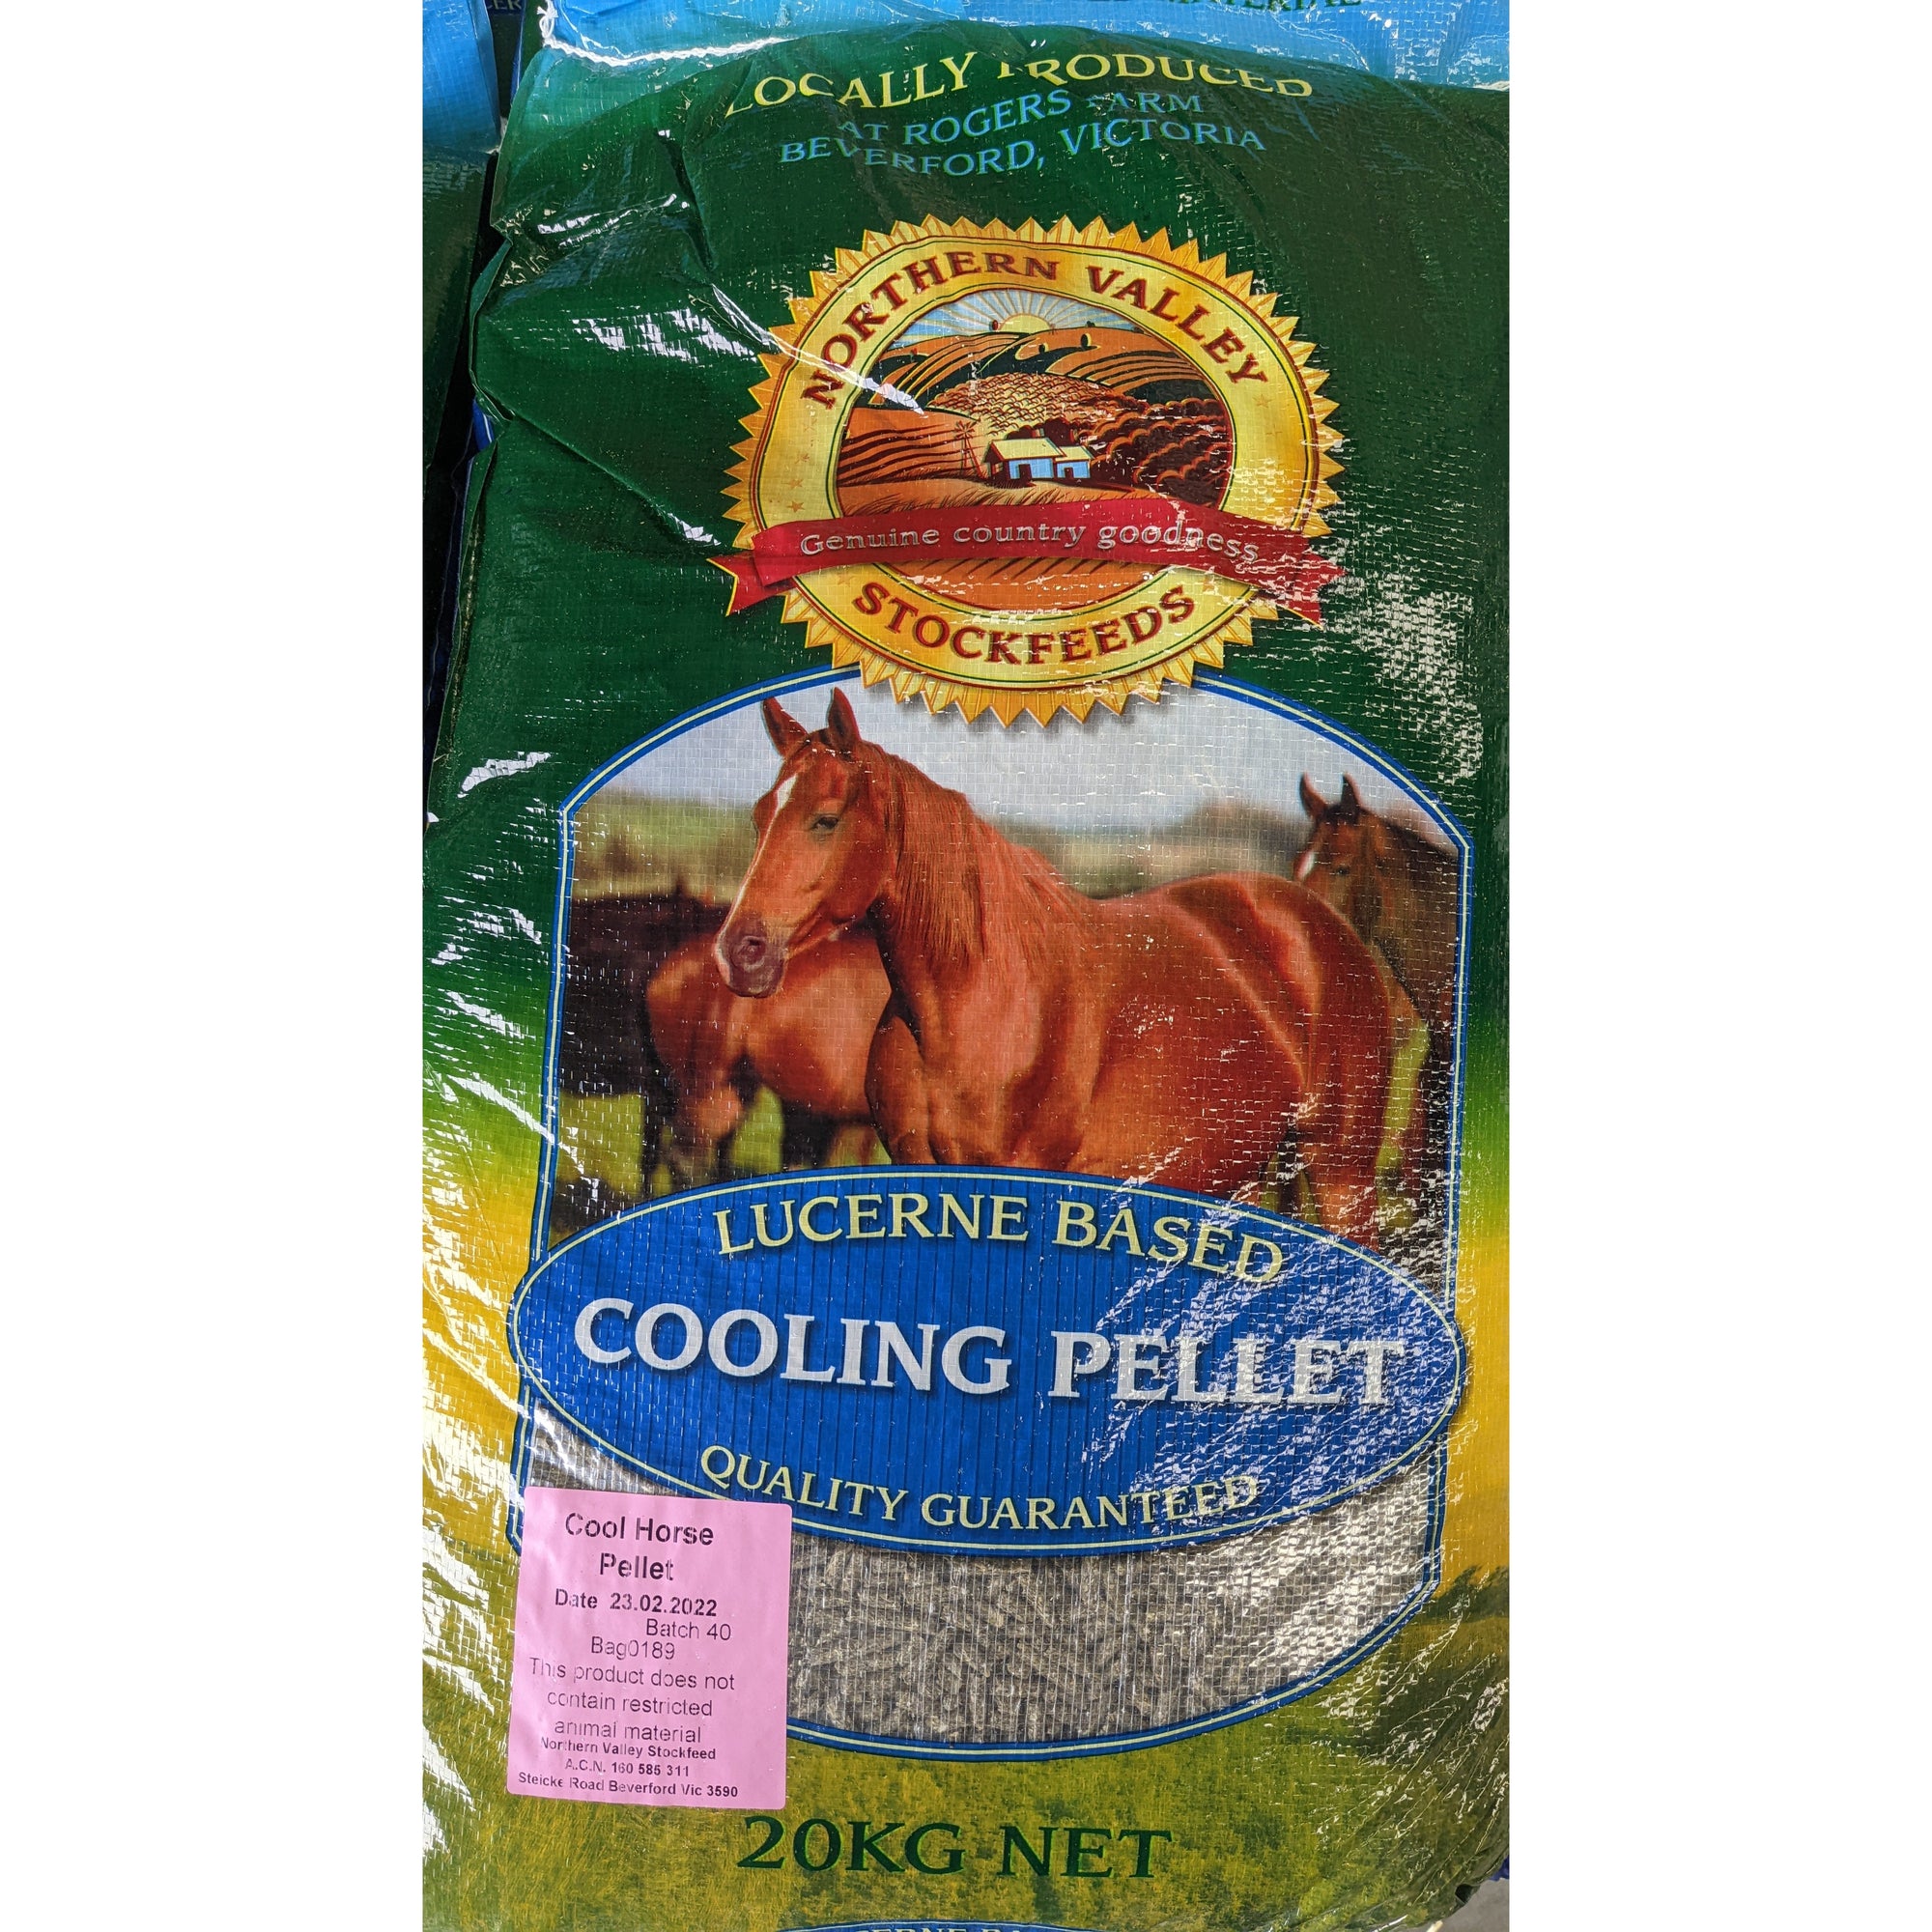 Northern Valley Cool Horse Pellet